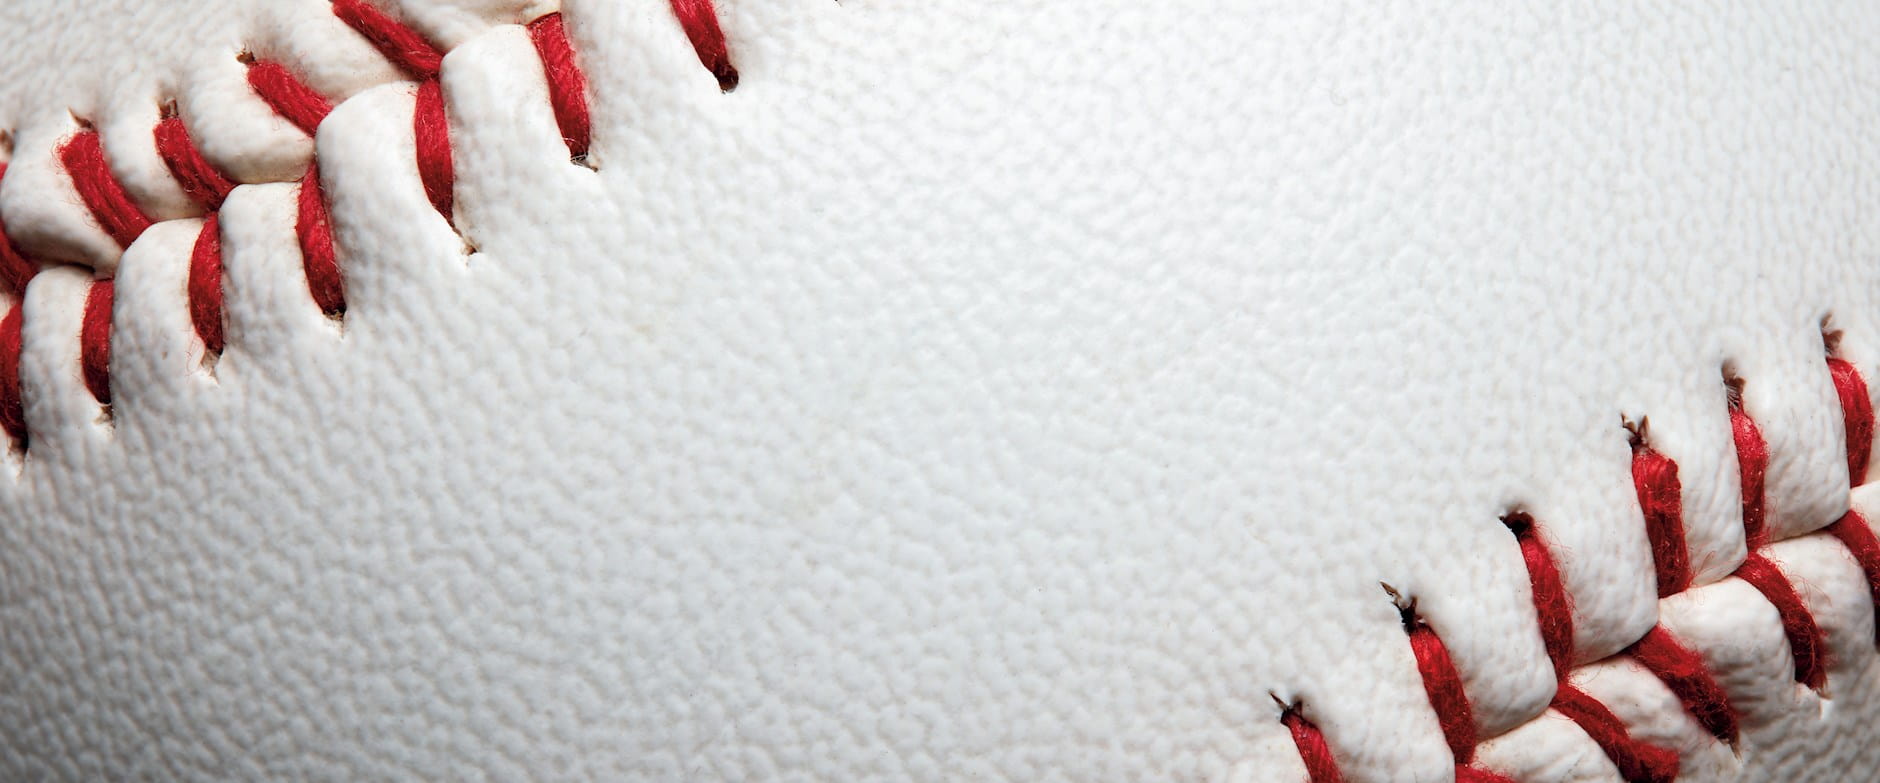 Extreme close up of a white baseball with red stitches